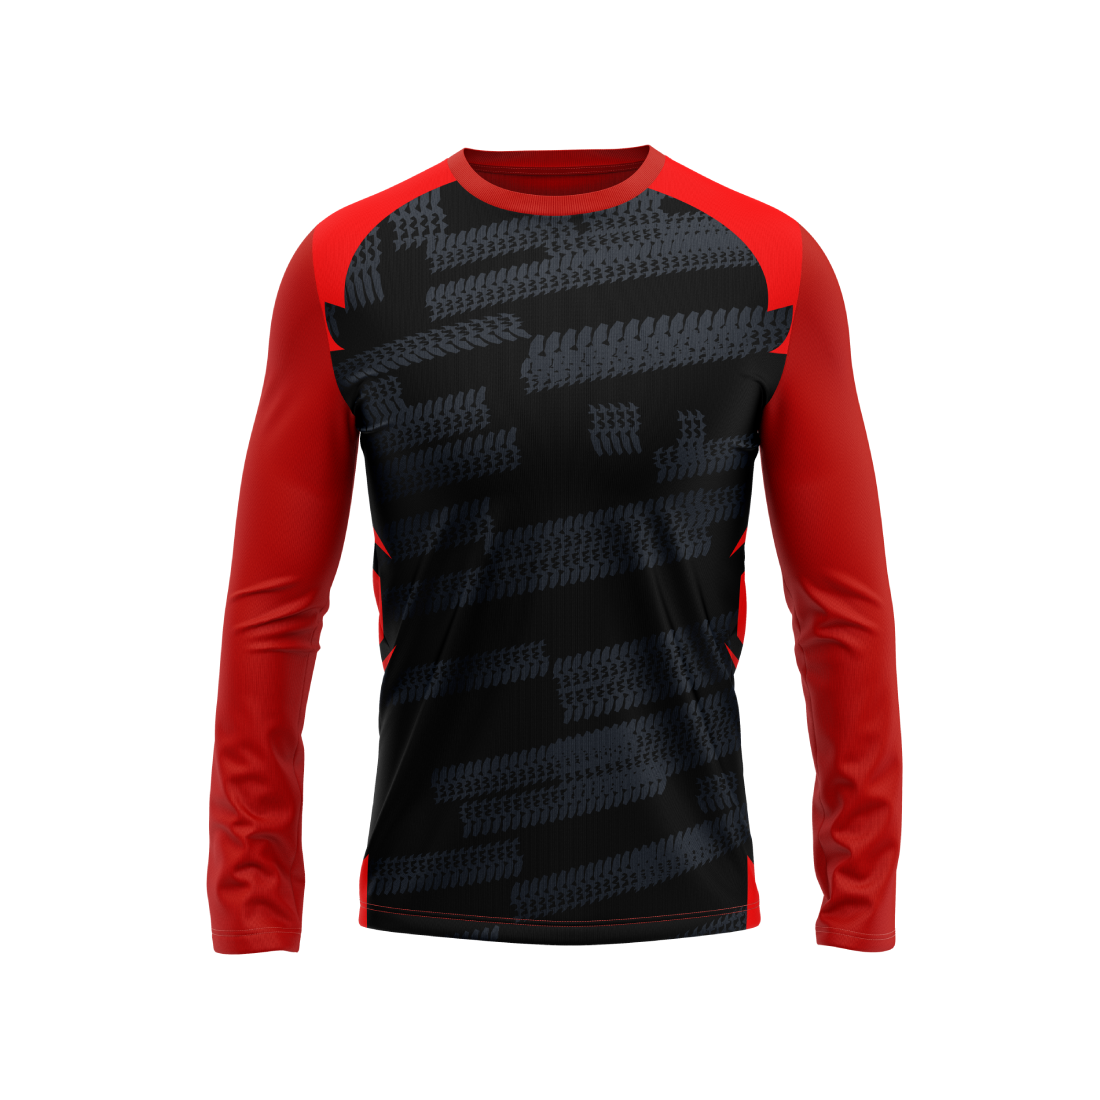 Round Neck Fullsleeve Printed Jersey Red NP5000061